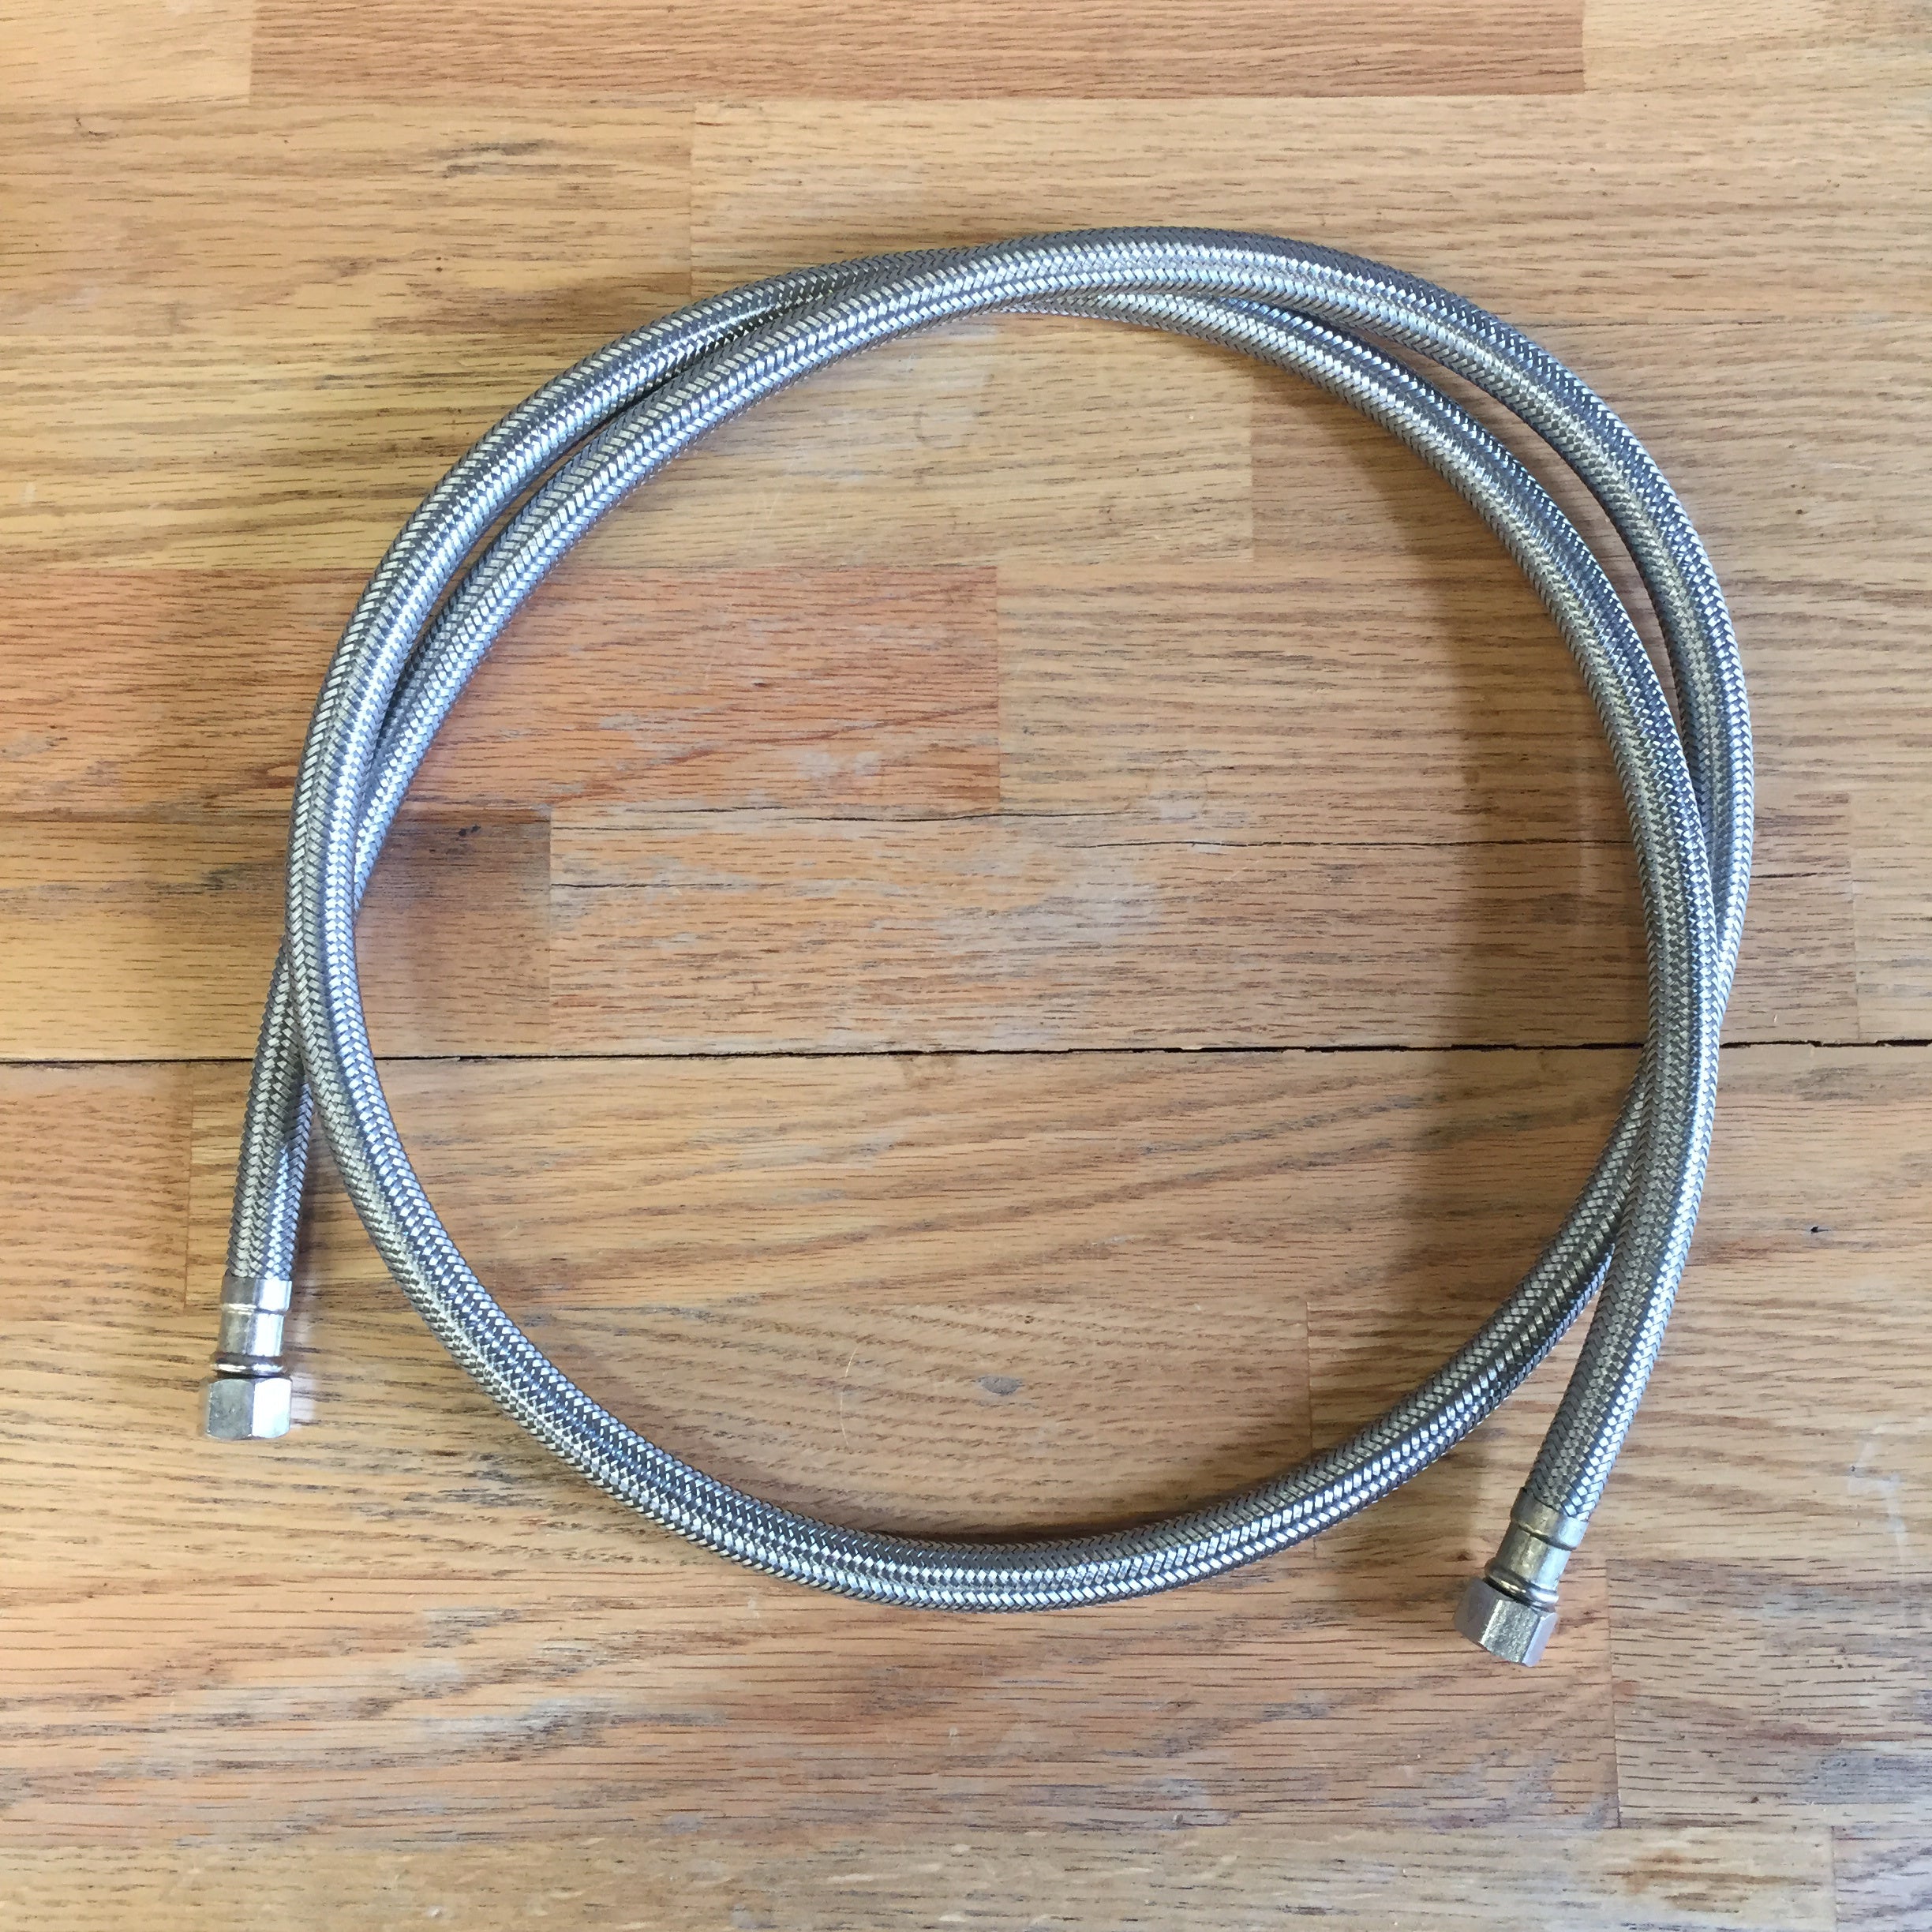 Braided Stainless Steel Water Line - 60"